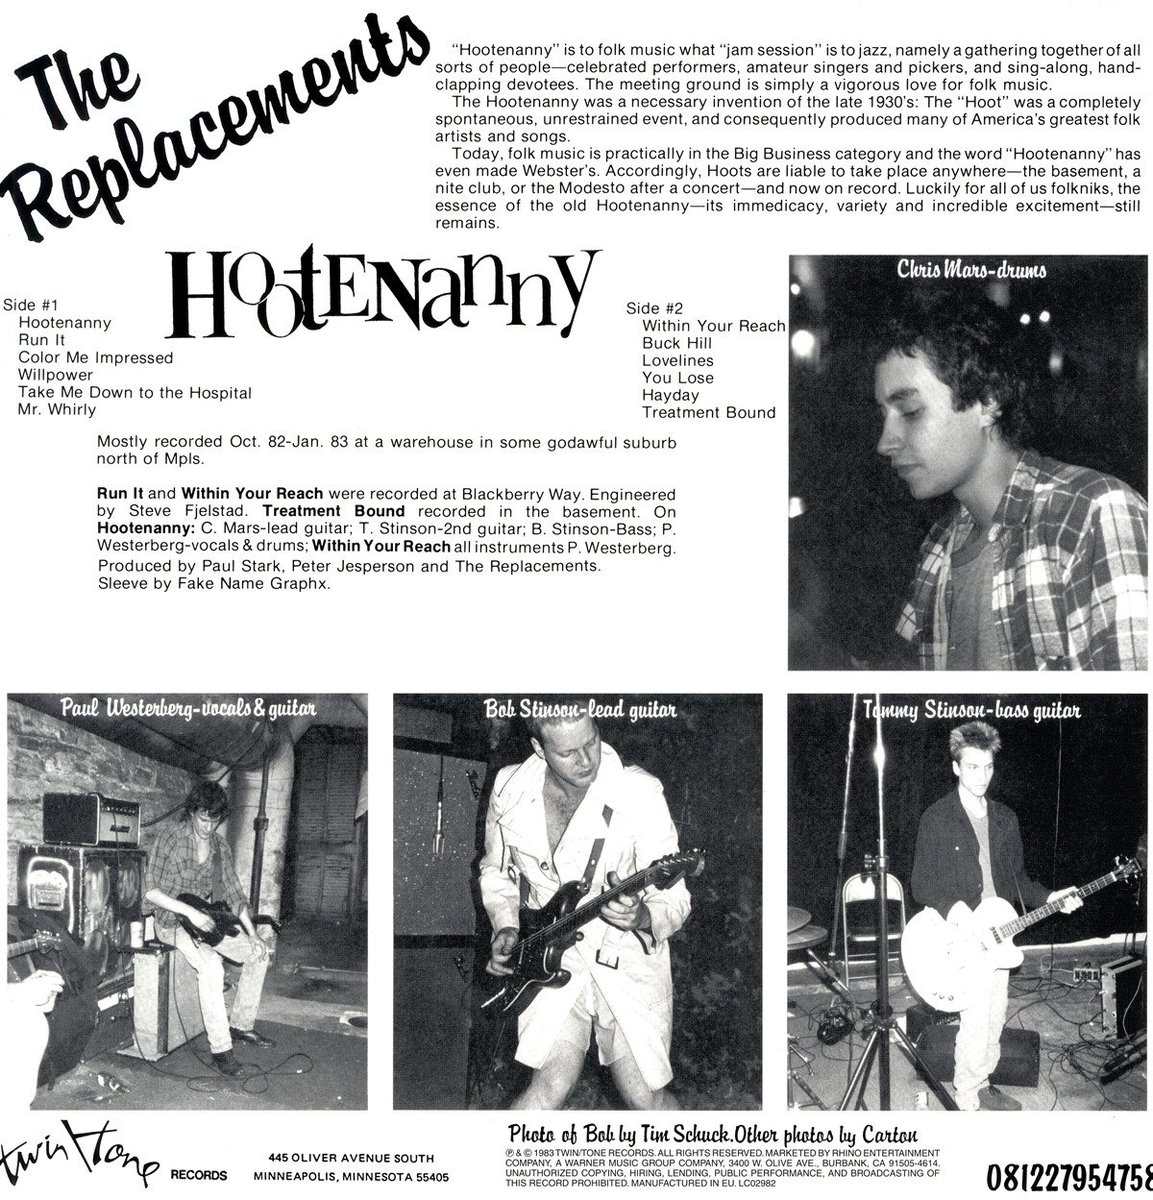 41 years ago today
Hootenanny is the second studio album by the American punk rock- / alternativ rock band The Replacements, released on this day in 1983

#punk #punks #punkrock #TheReplacements #history #punkrockhistory #otd